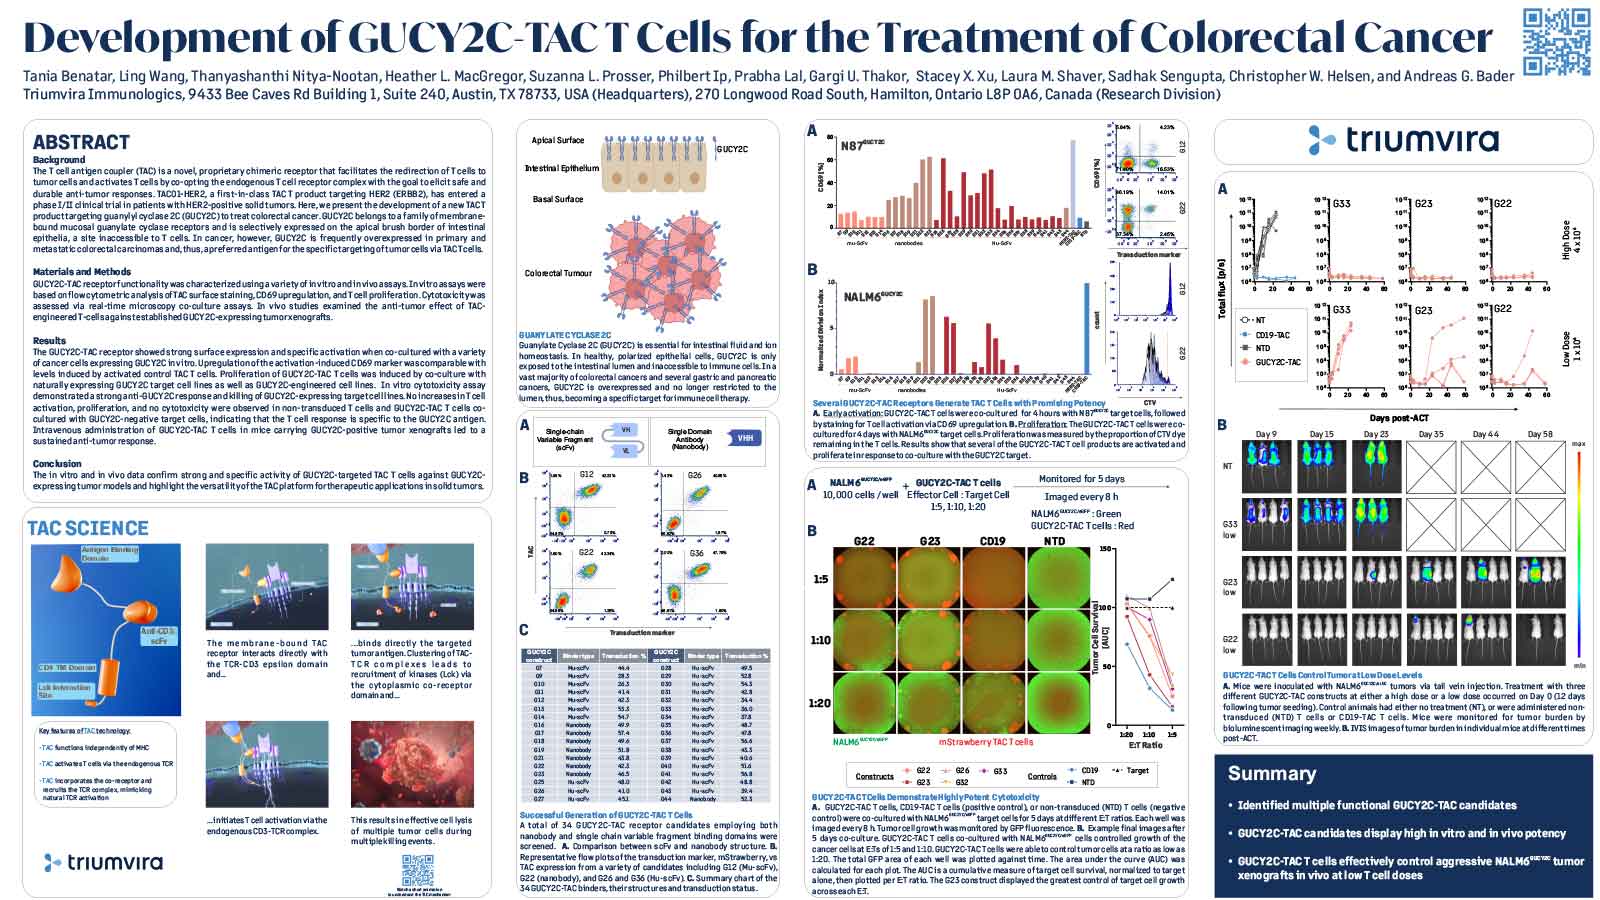 Development of GUCY2C-TAC T Cells for the Treatment of Colorectal Cancer